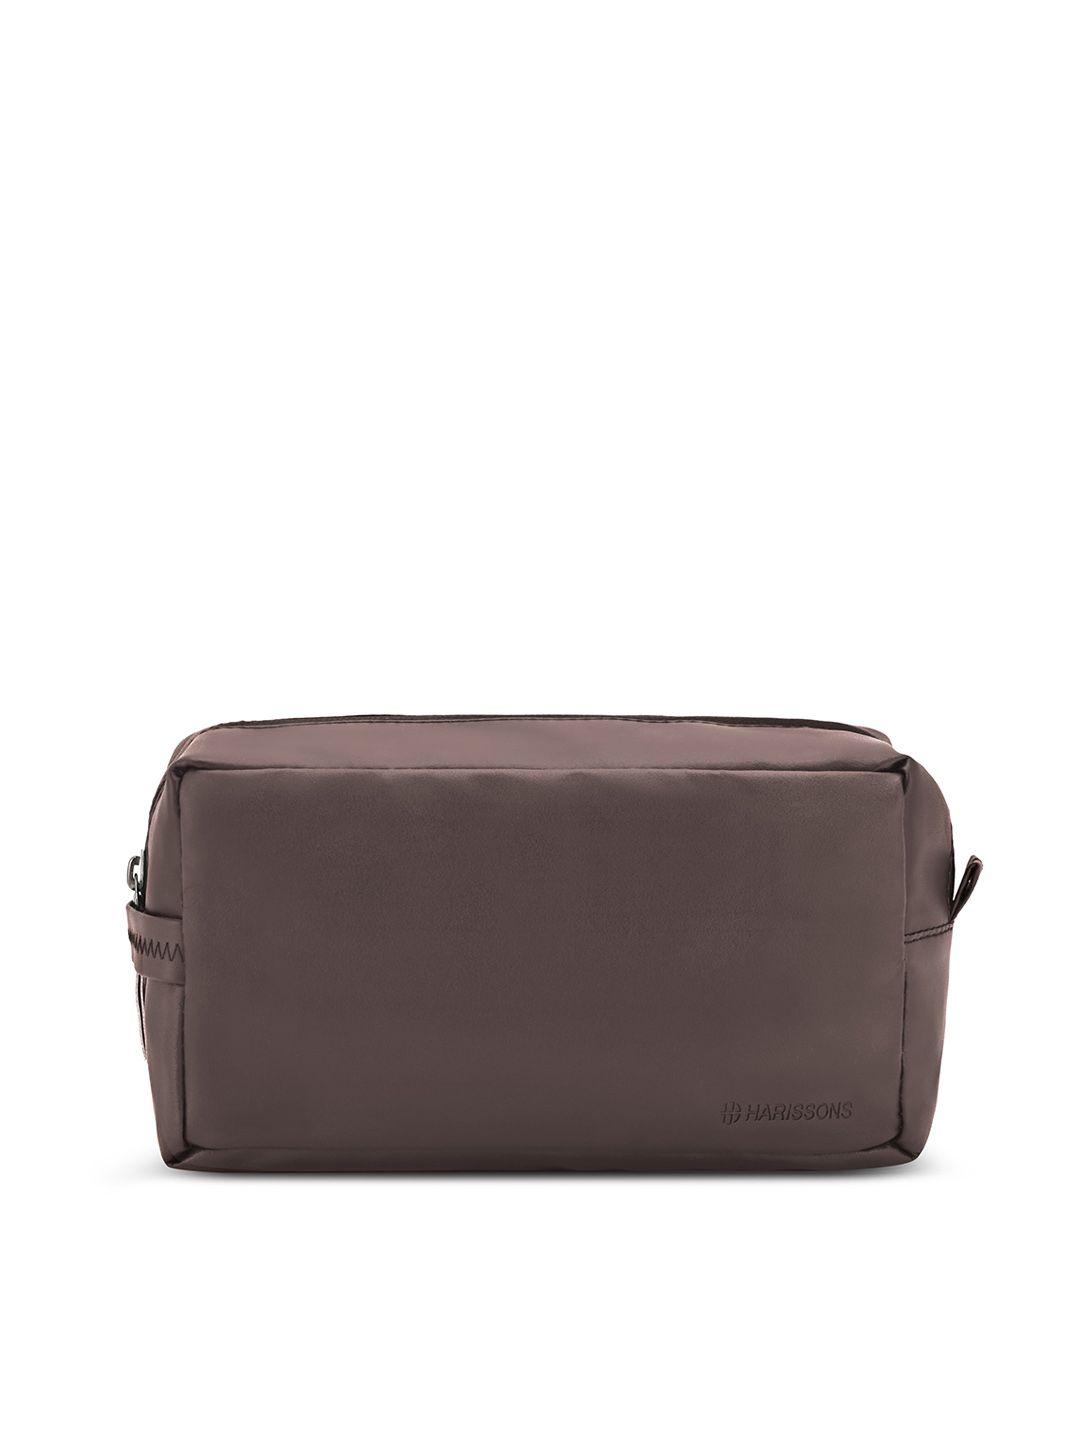 harissons vegan leather travel pouch